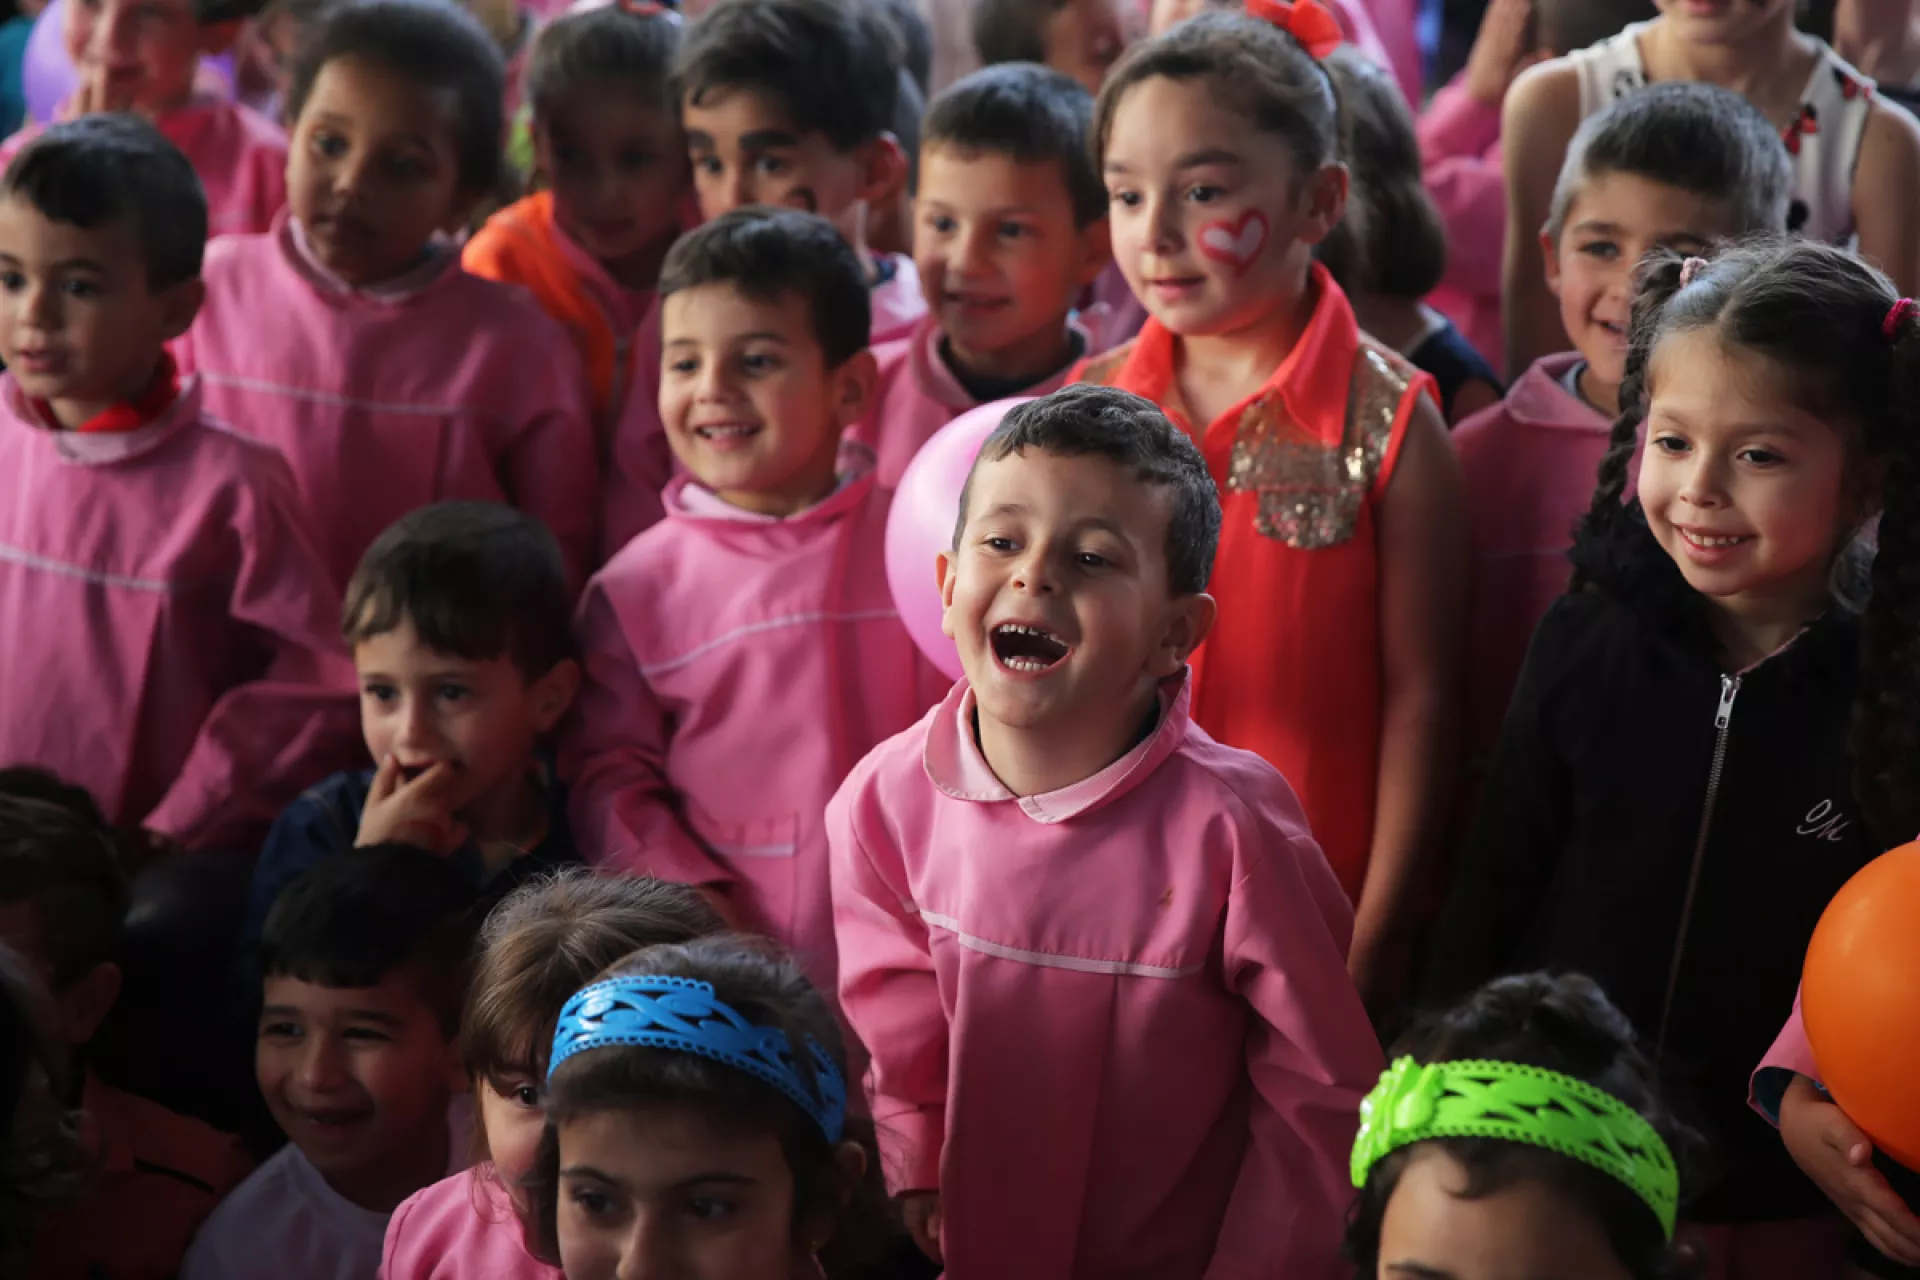 A group of young girls and boys dressed in pink and smiling